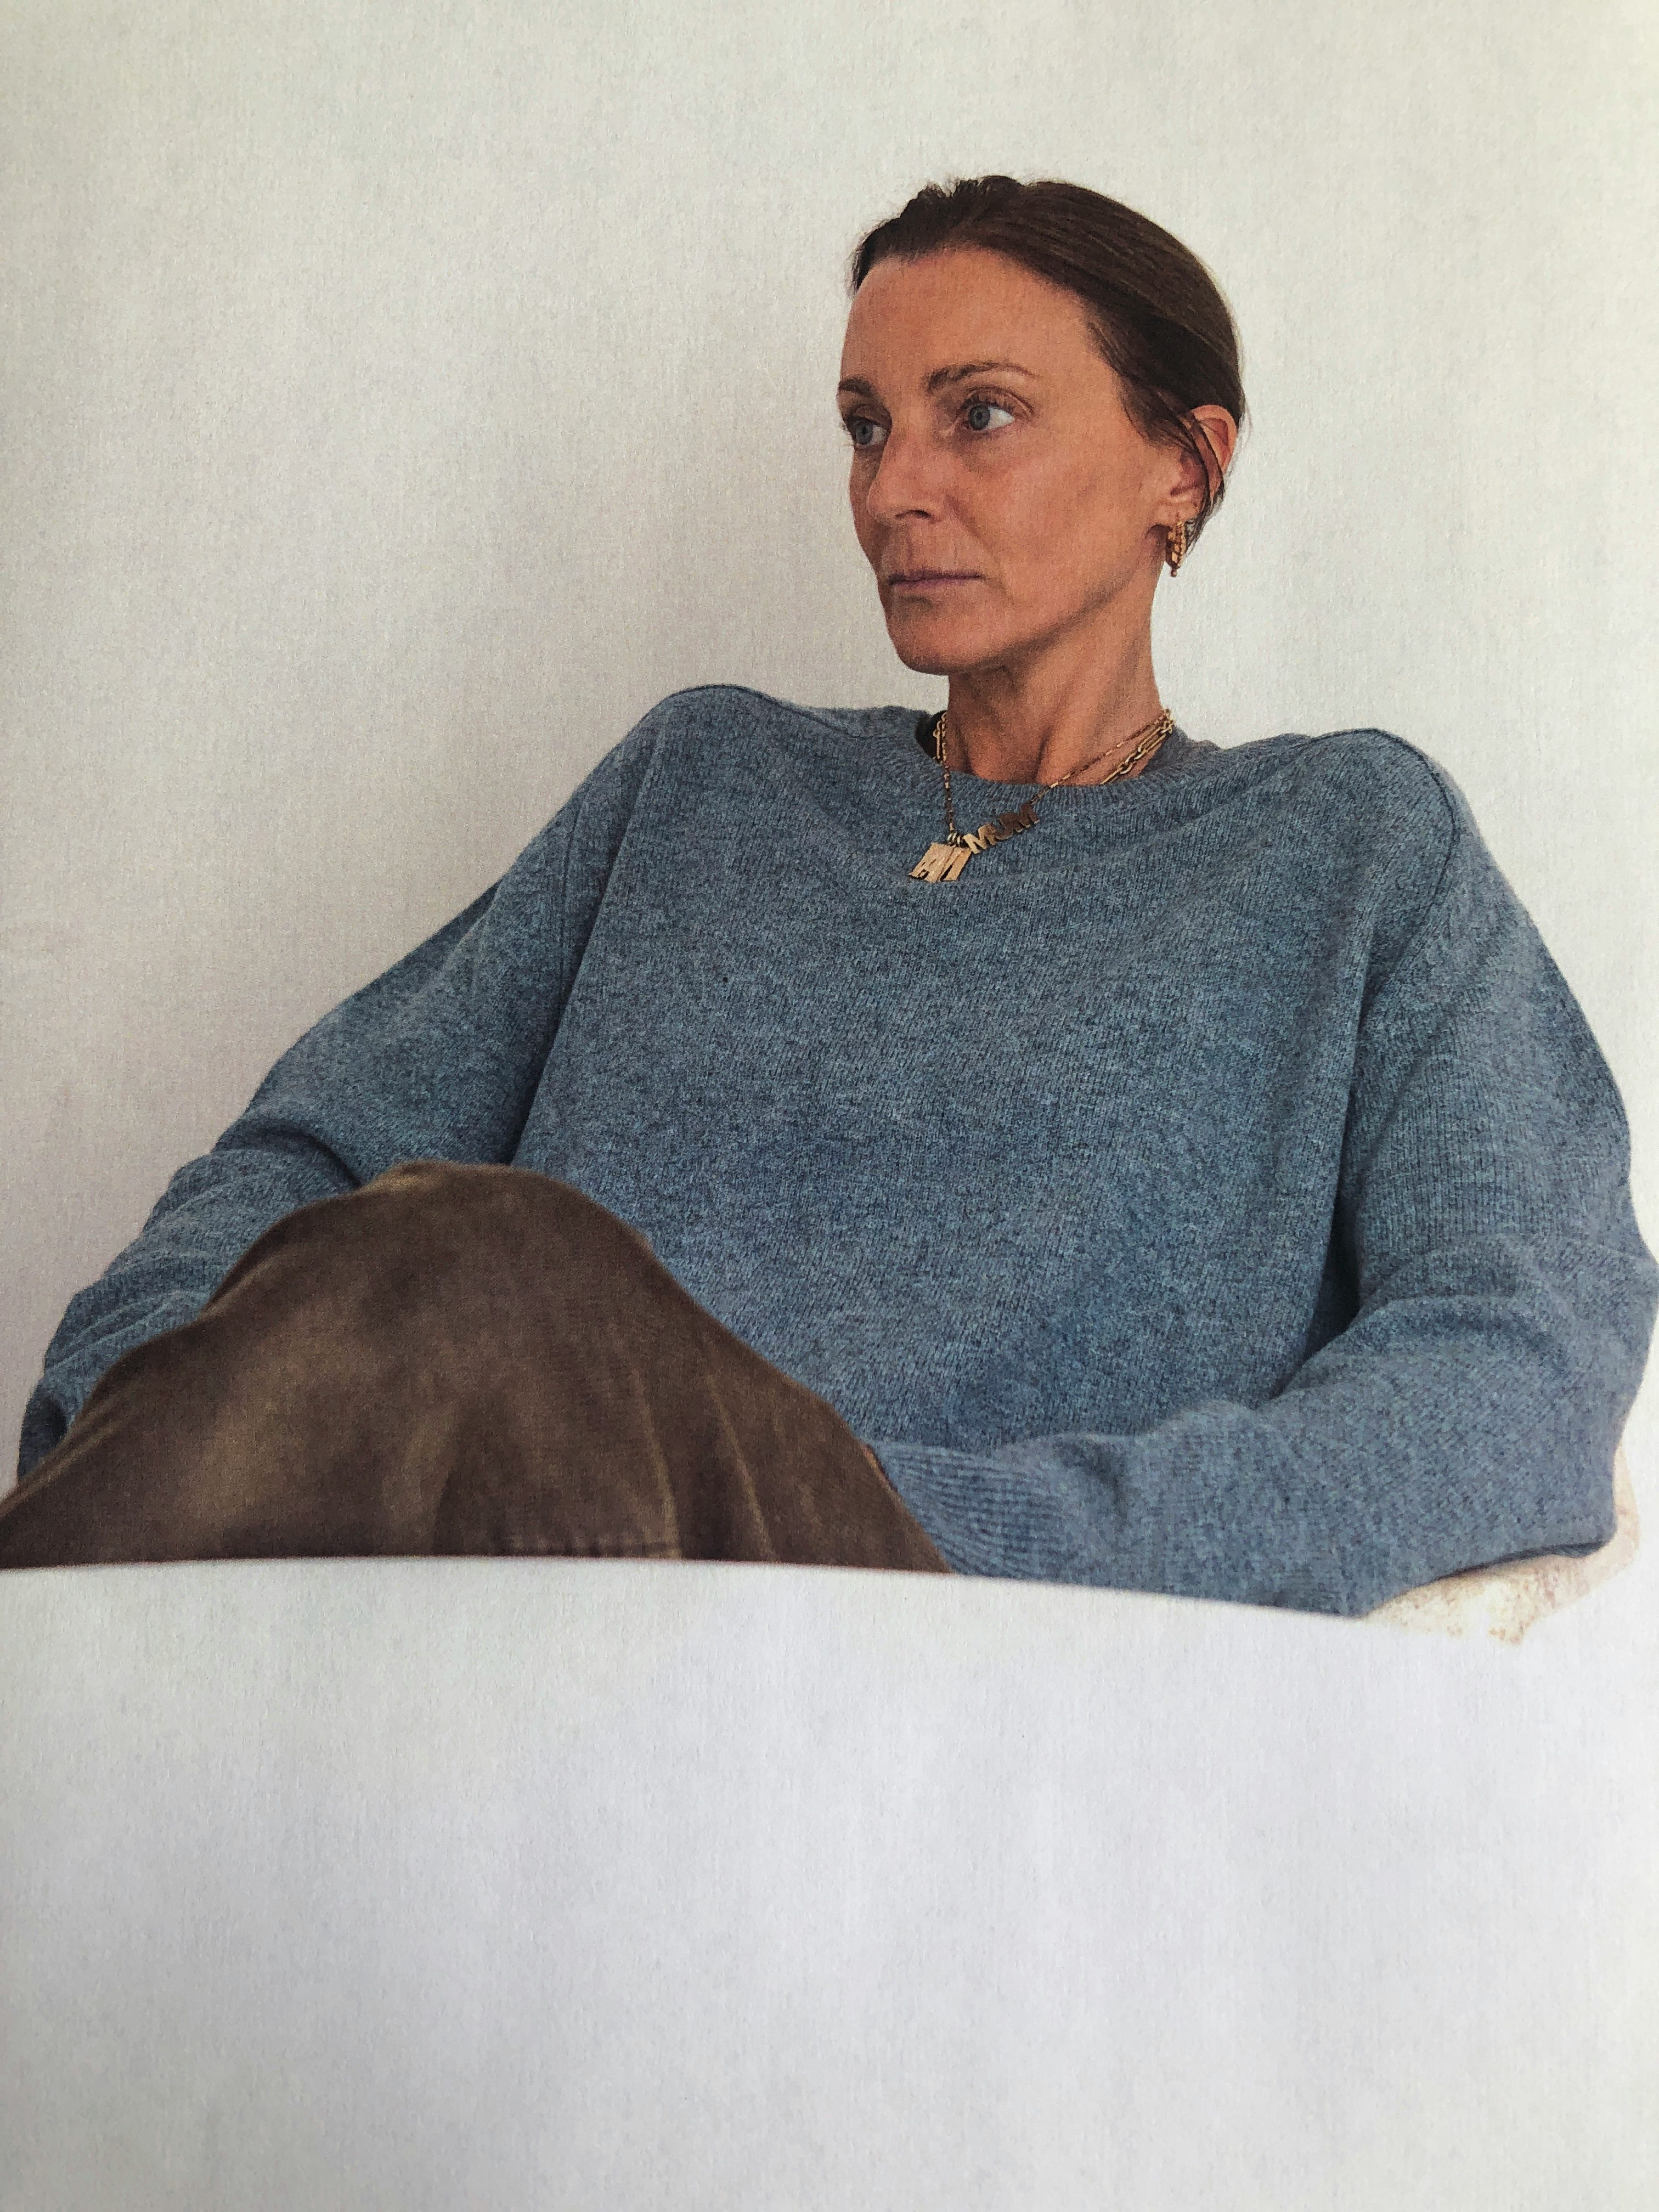 Phoebe Philo will make her return to fashion with a namesake brand. Phoebe Philo.